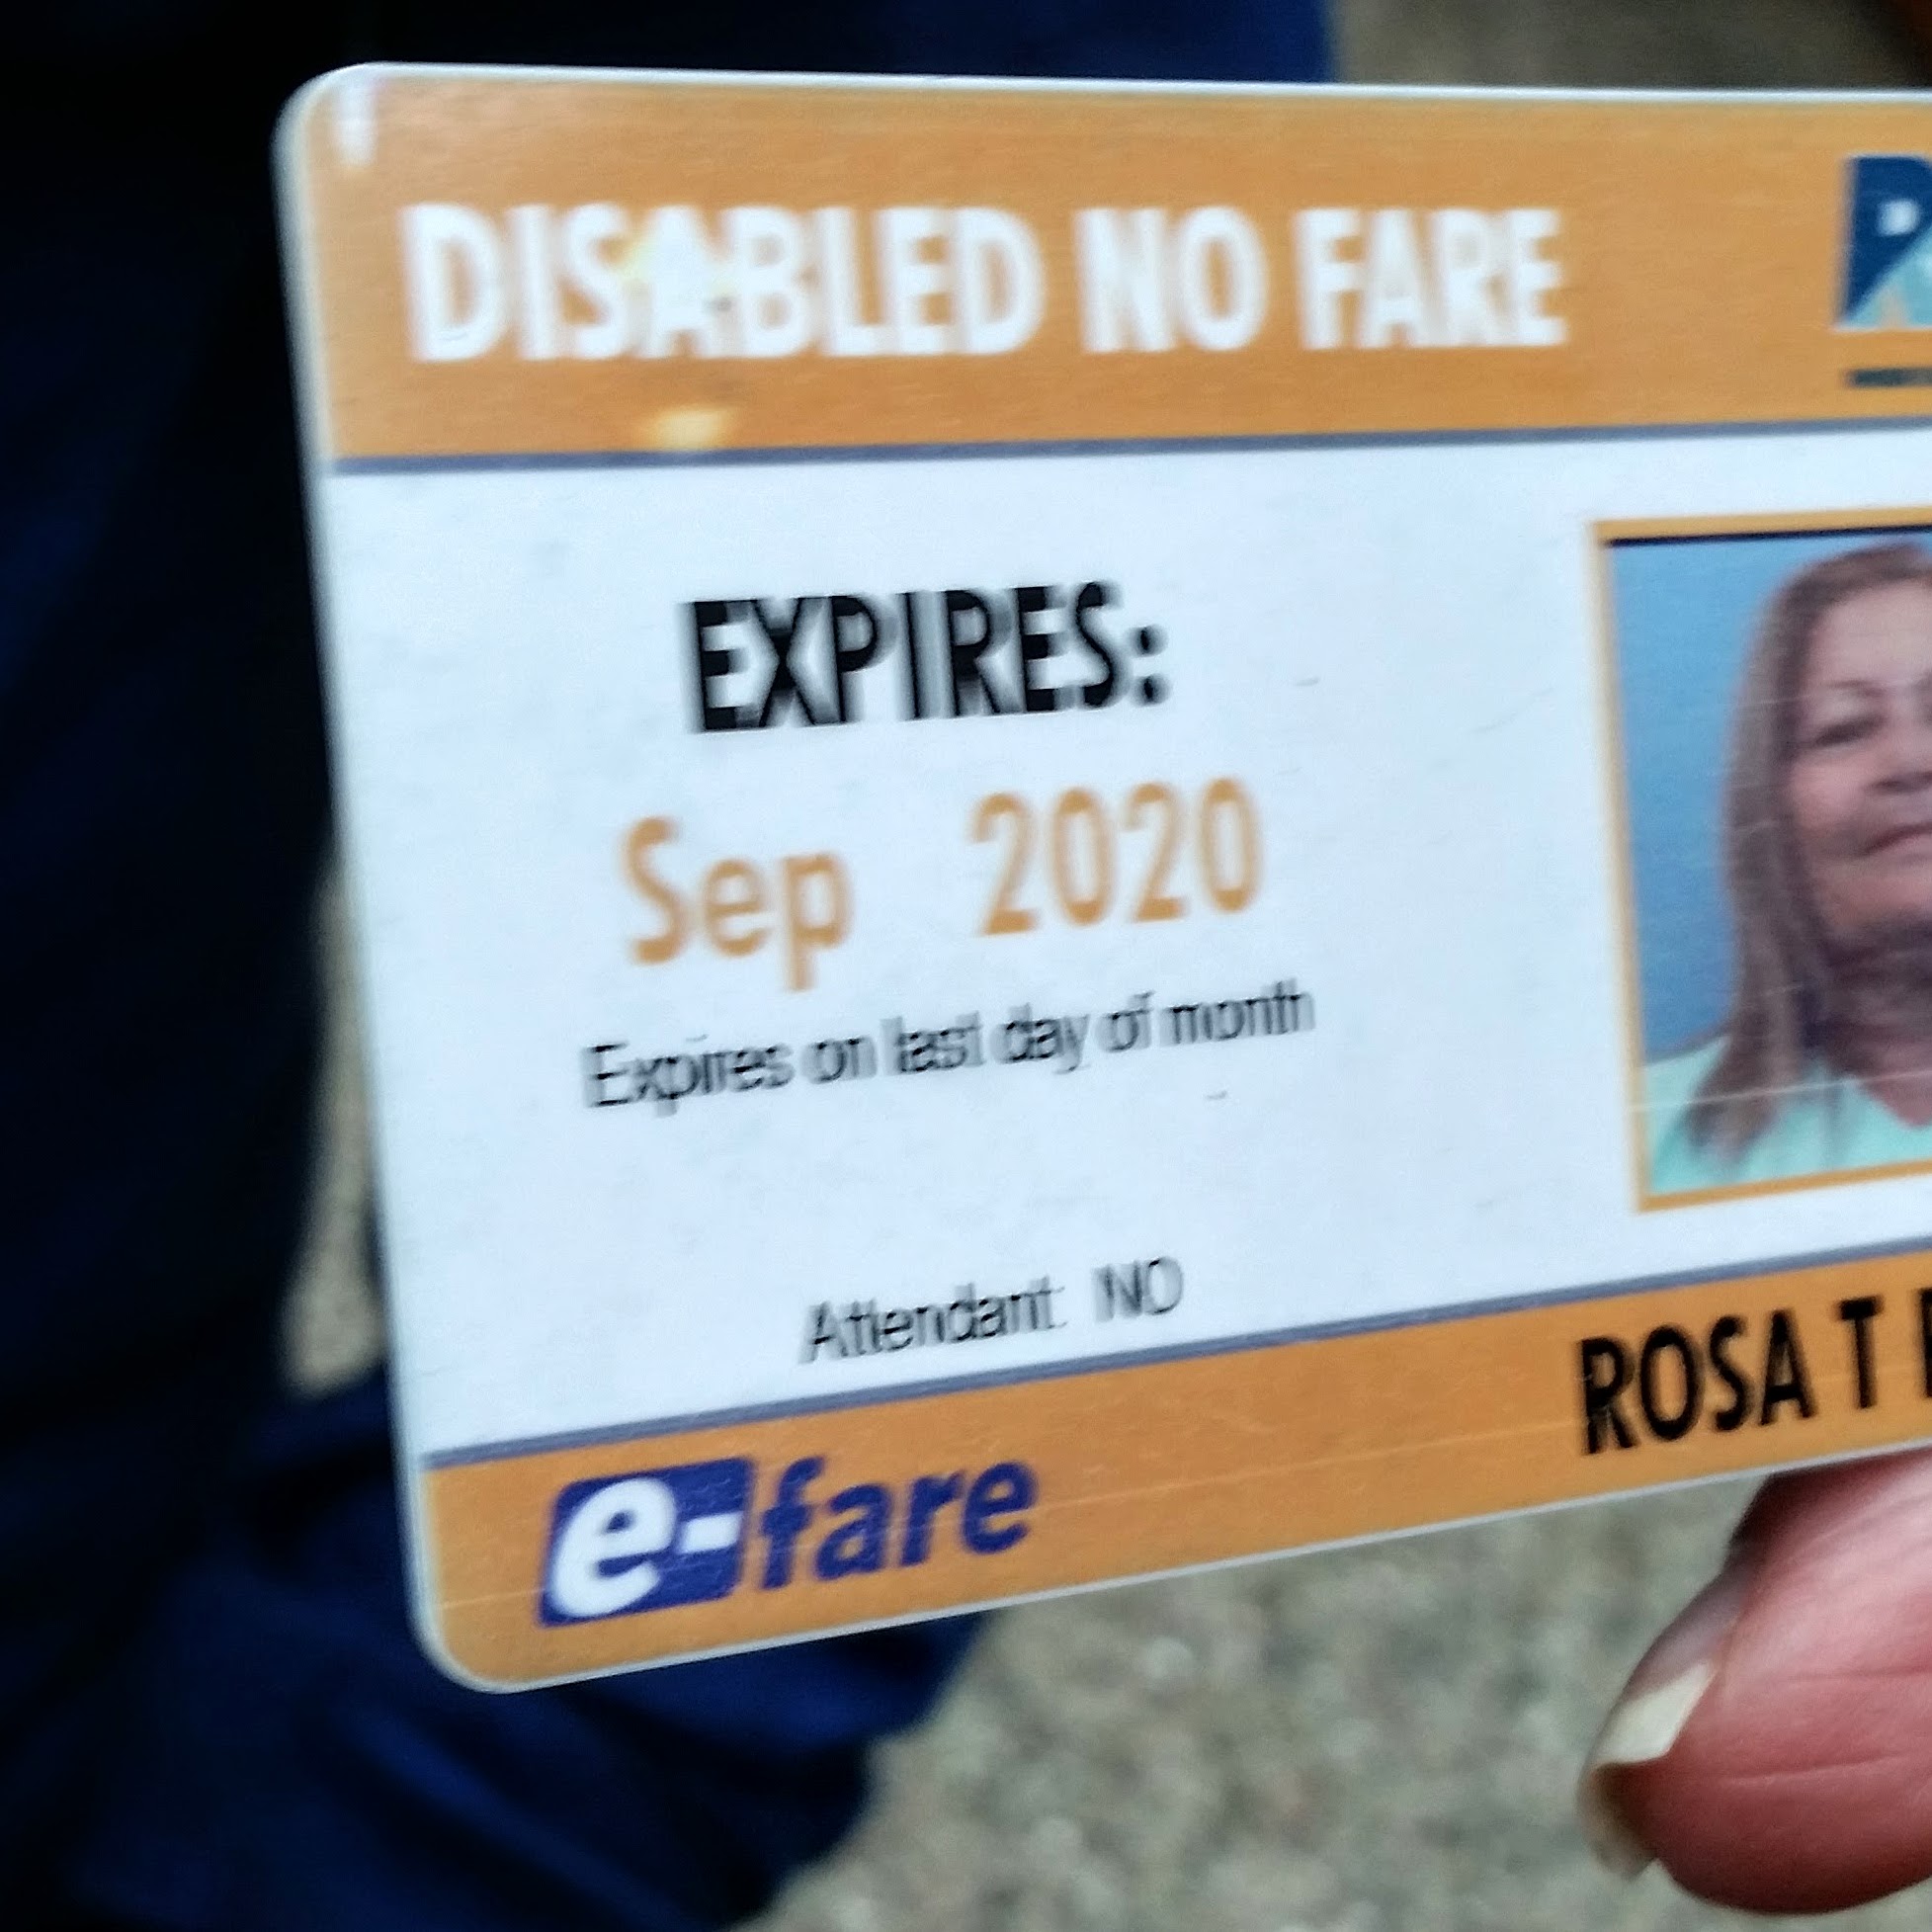 Senior/disabled bus pass requalification leads to long lines RI Future